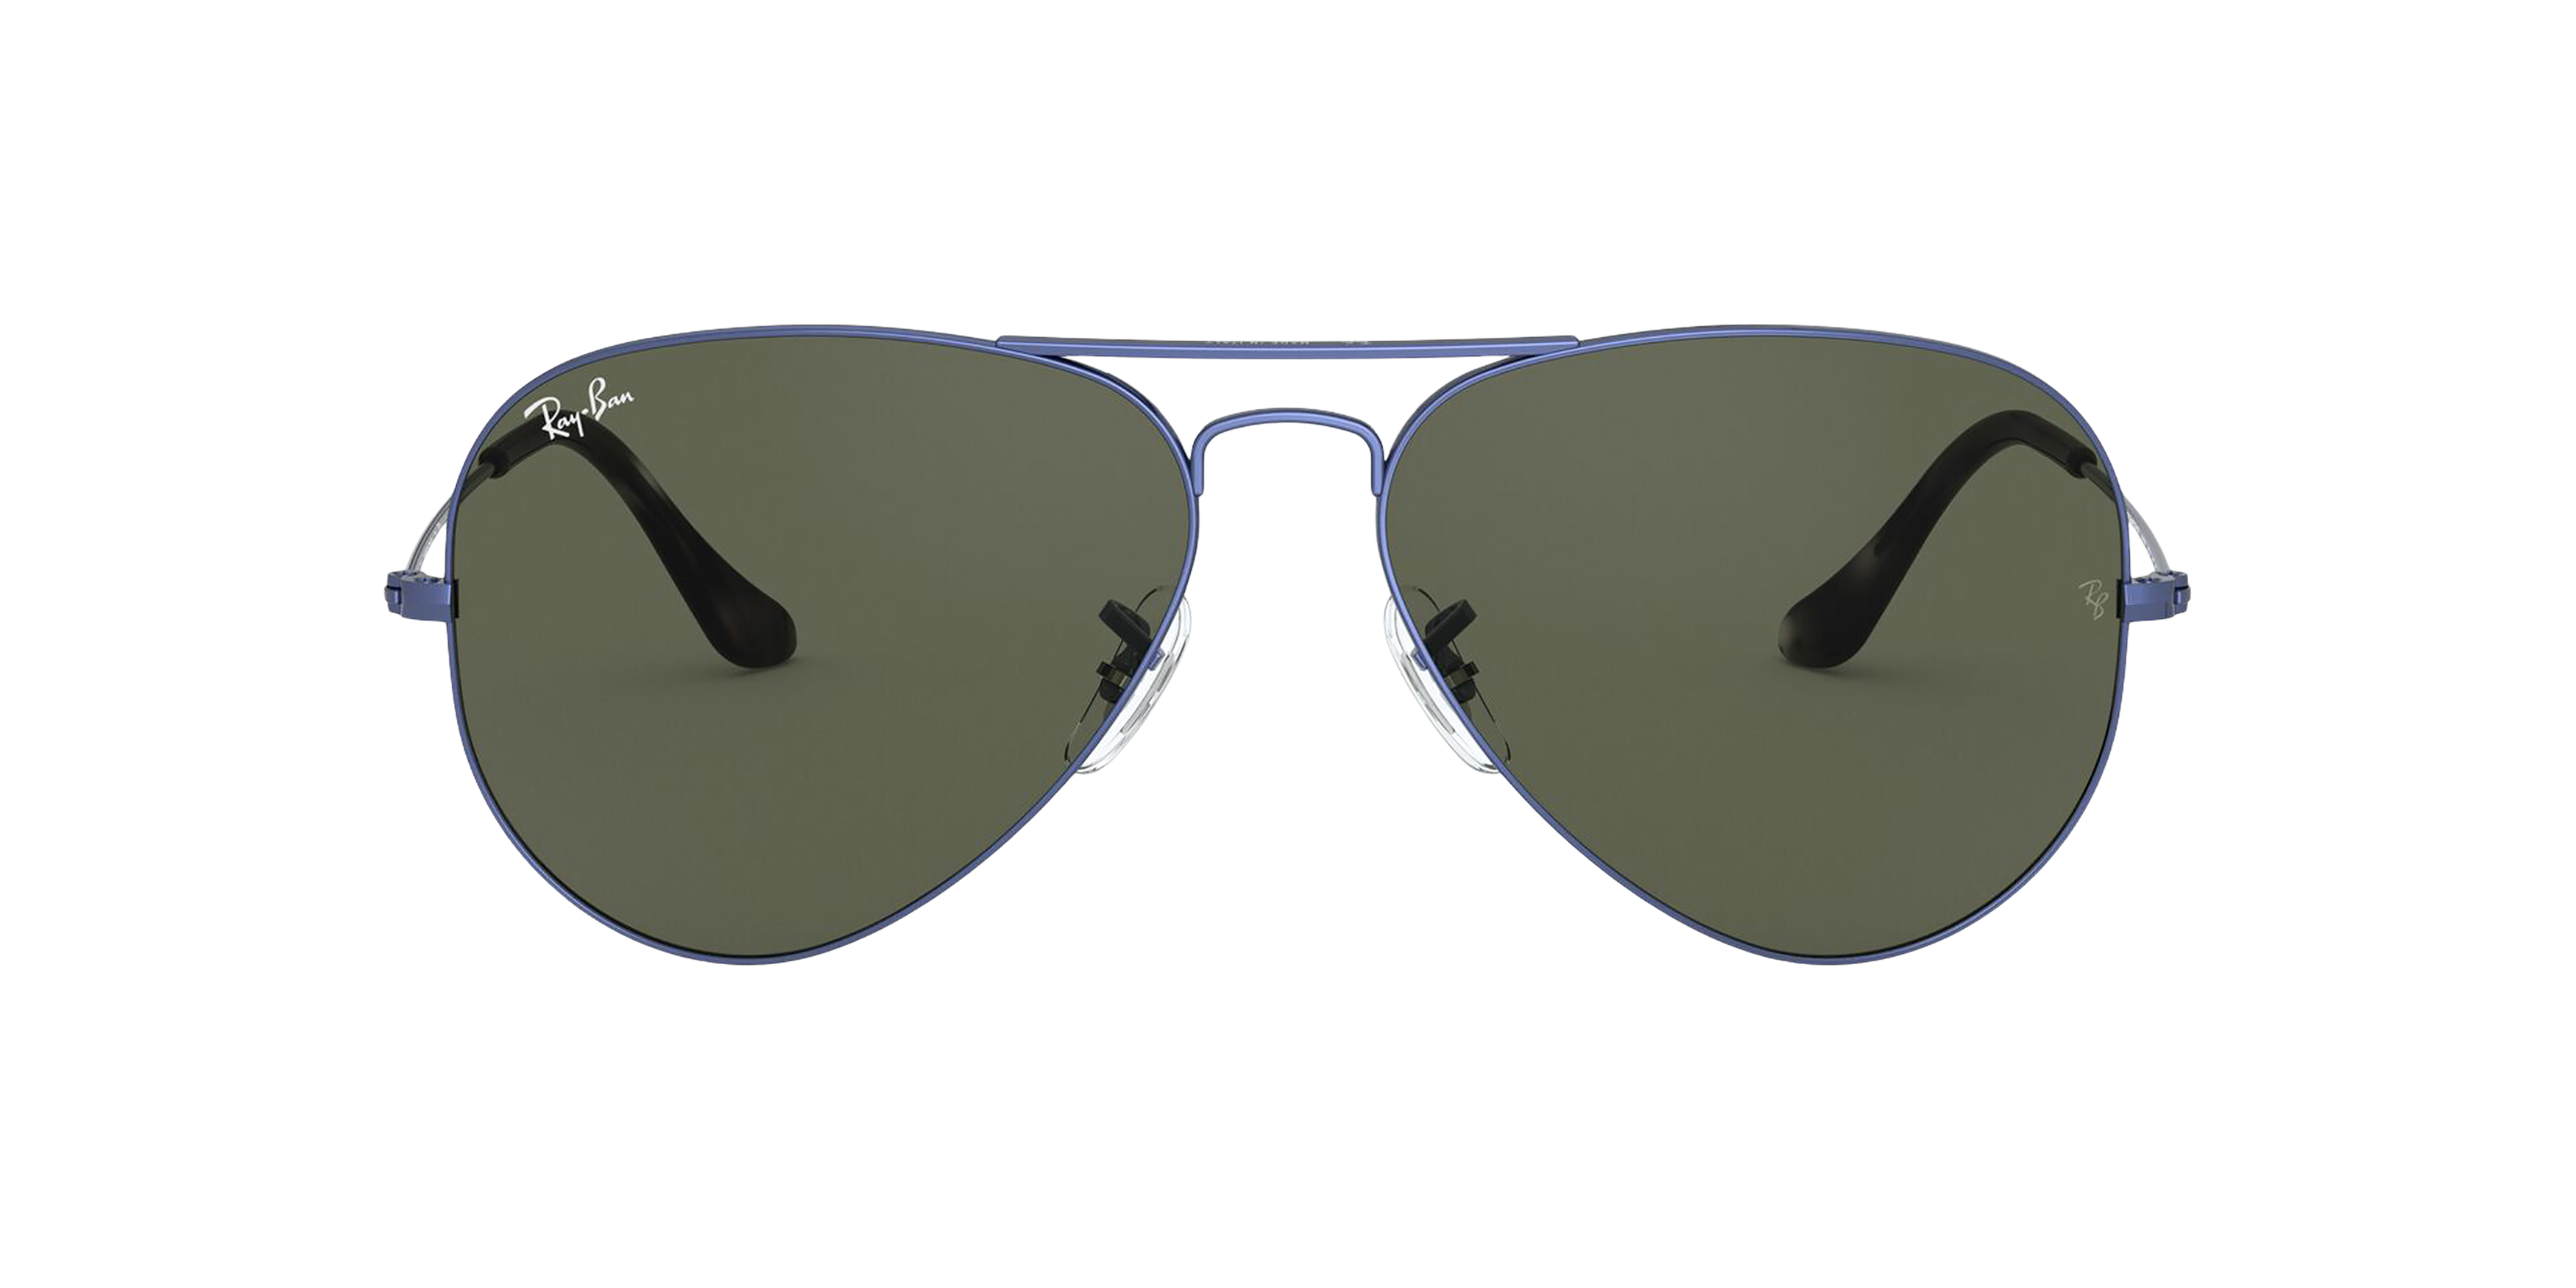 [products.image.front] Ray-Ban Aviator Classic RB3025 918731